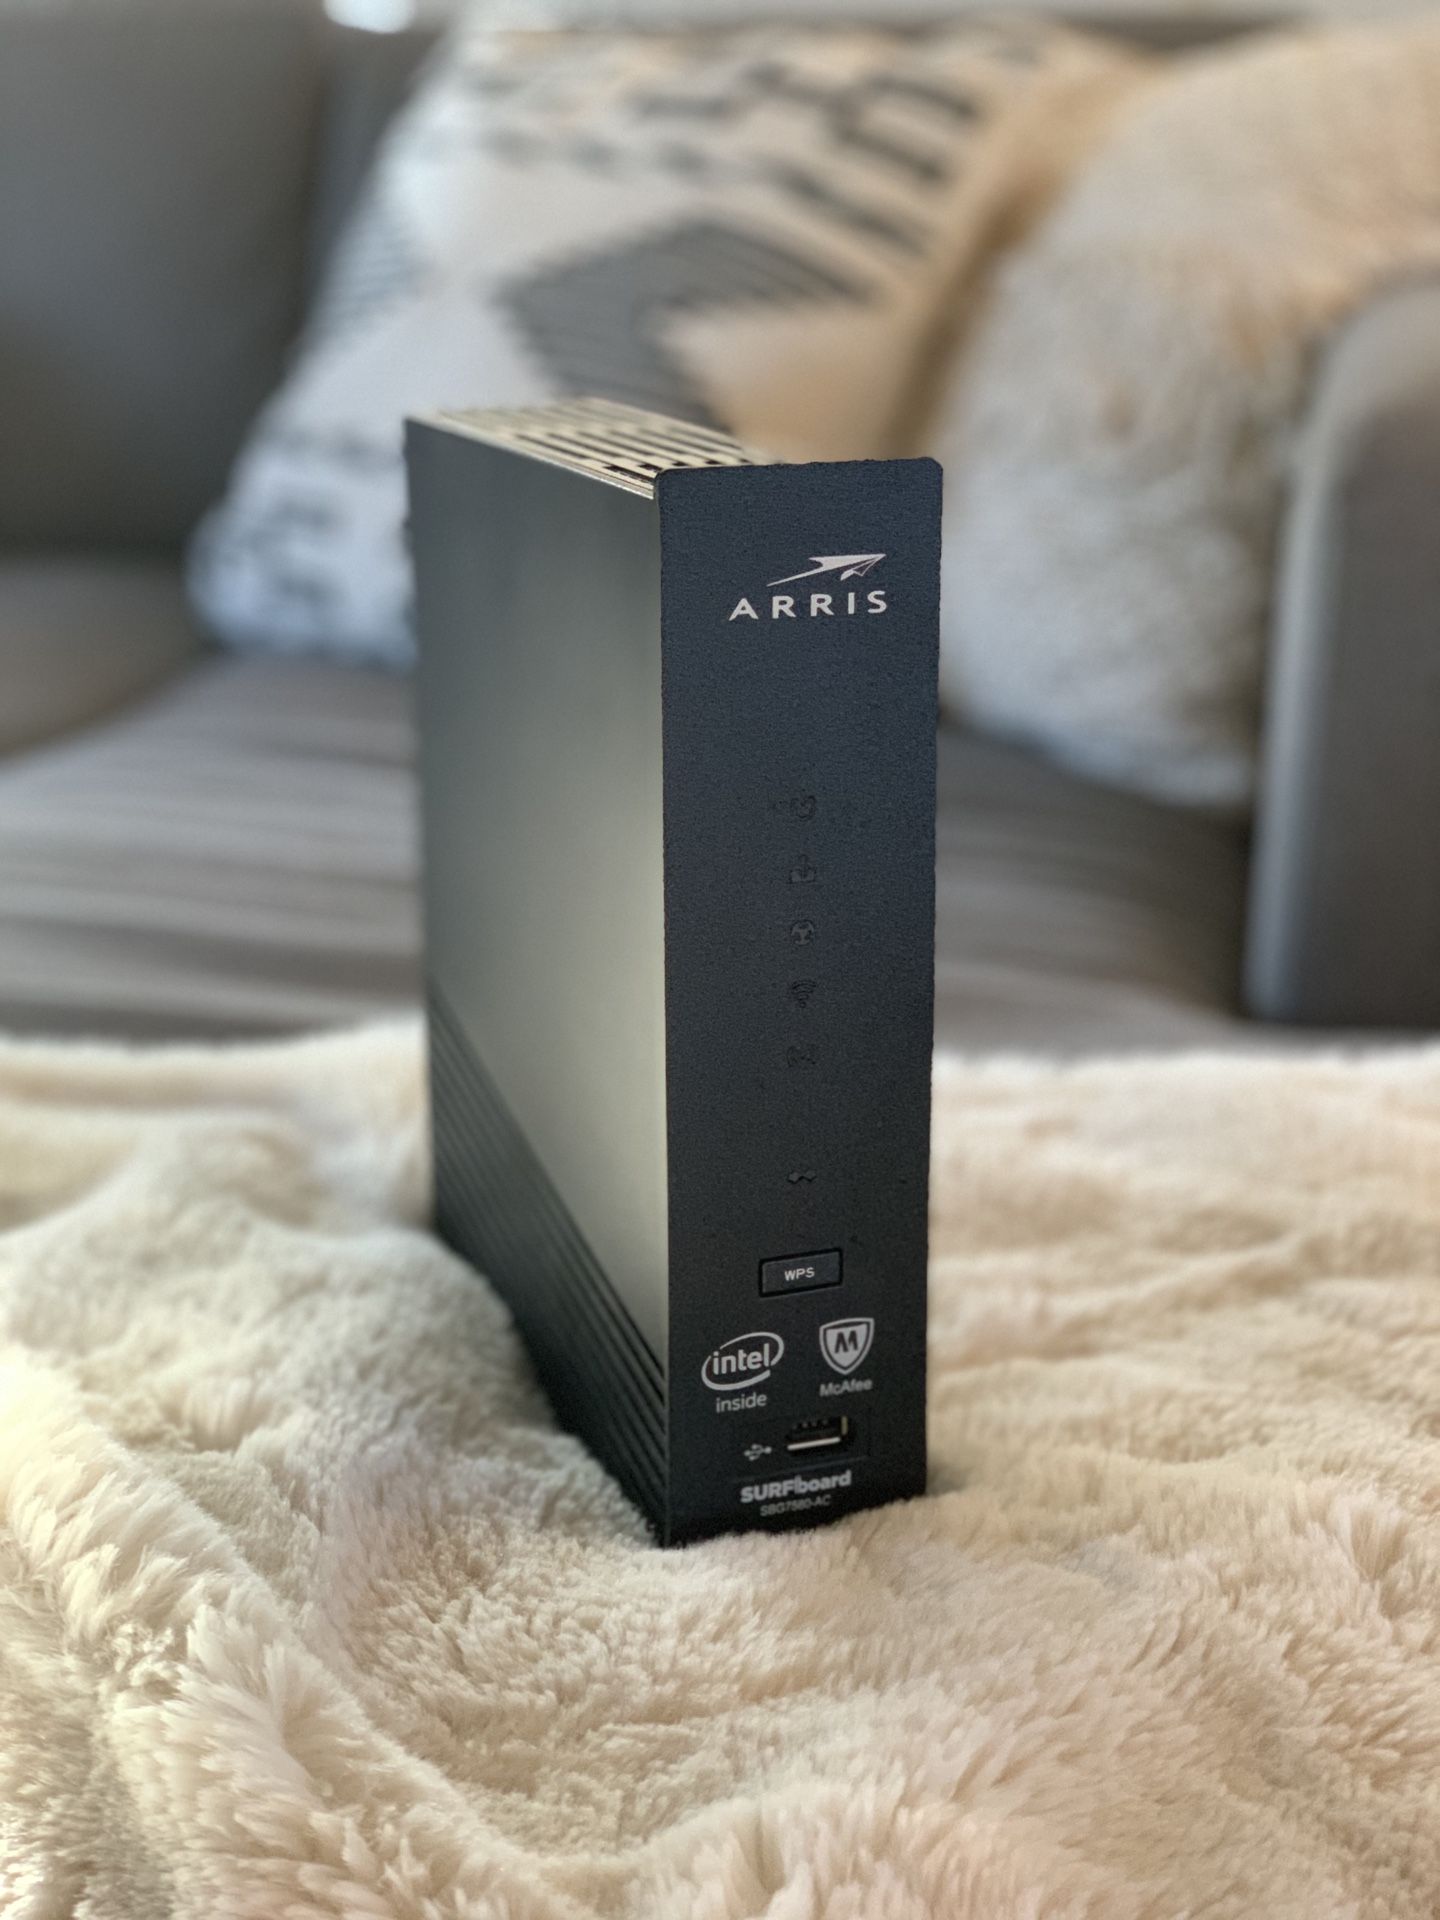 Arris SBG7580-AC Modem and router - works with Comcast